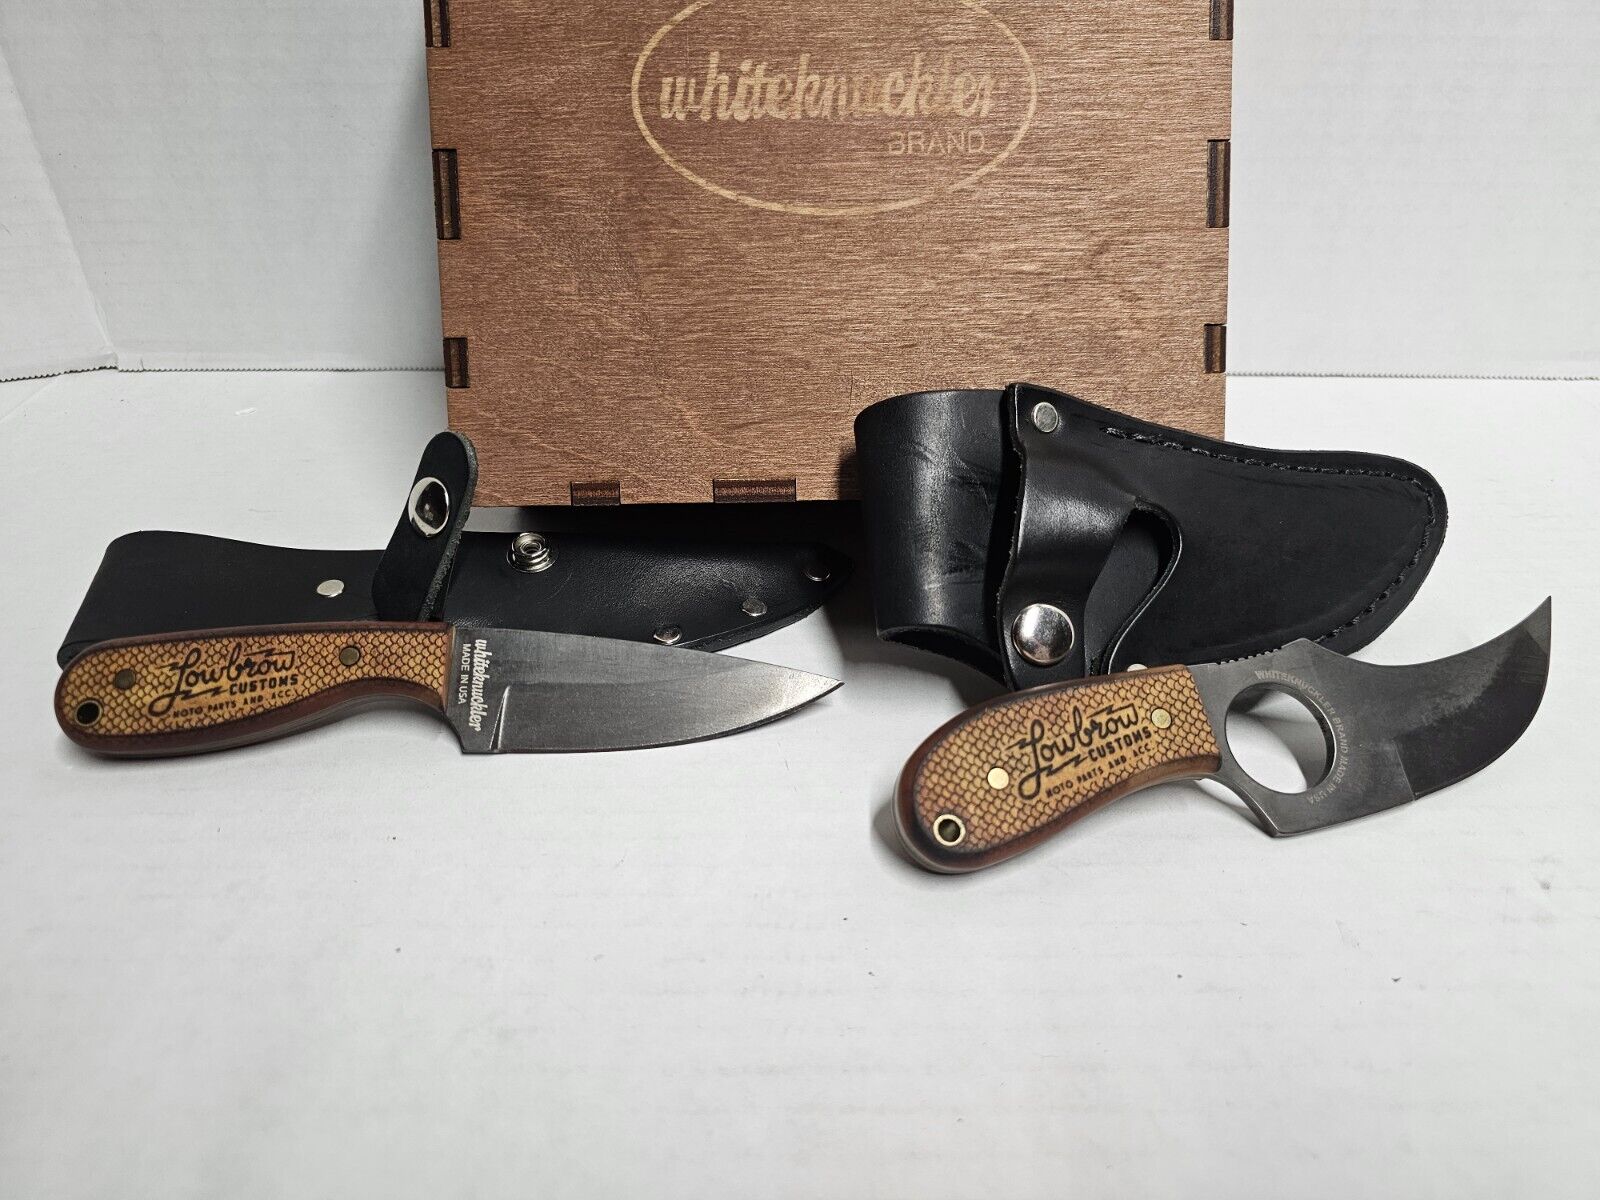 Whiteknuckler Special Edition Lowbrow Customs collaboration Knife Set w/ Box 